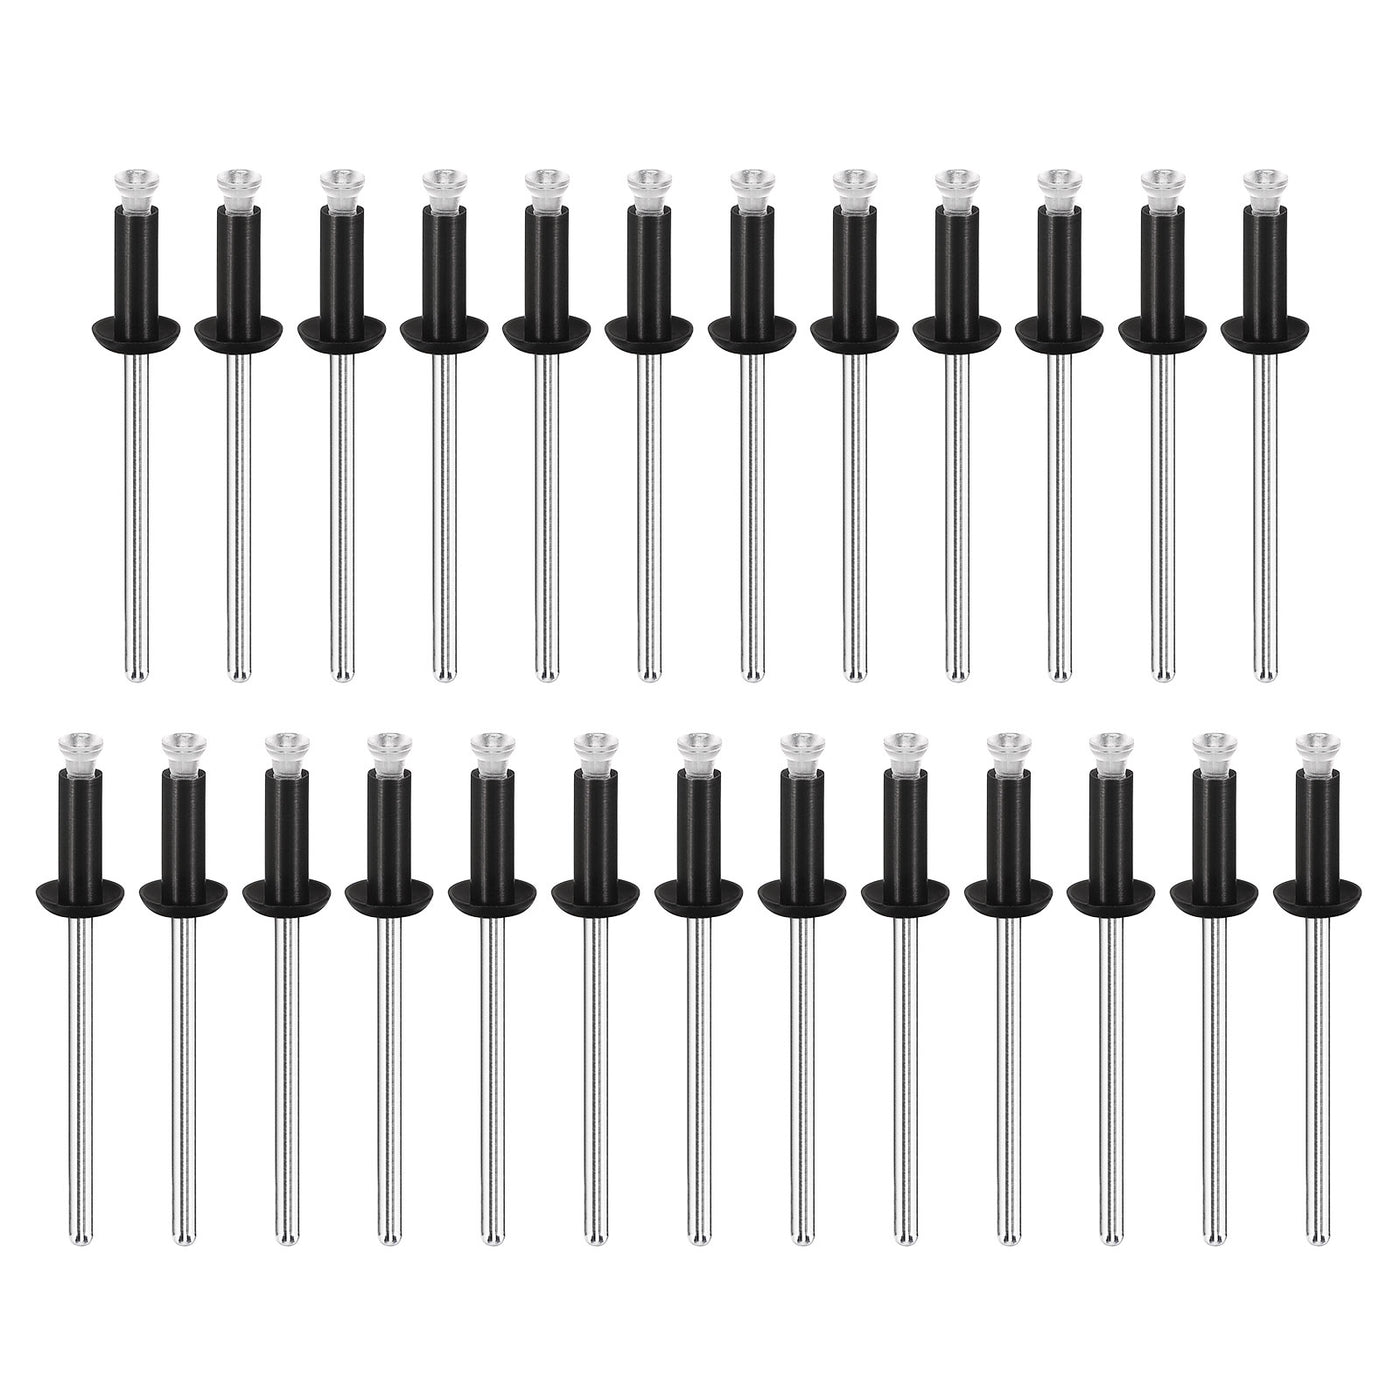 uxcell Uxcell 4mm x 9.6mm Nylon Blind Rivets for PC Board Bumper Trim Retainer, Black 50Pcs